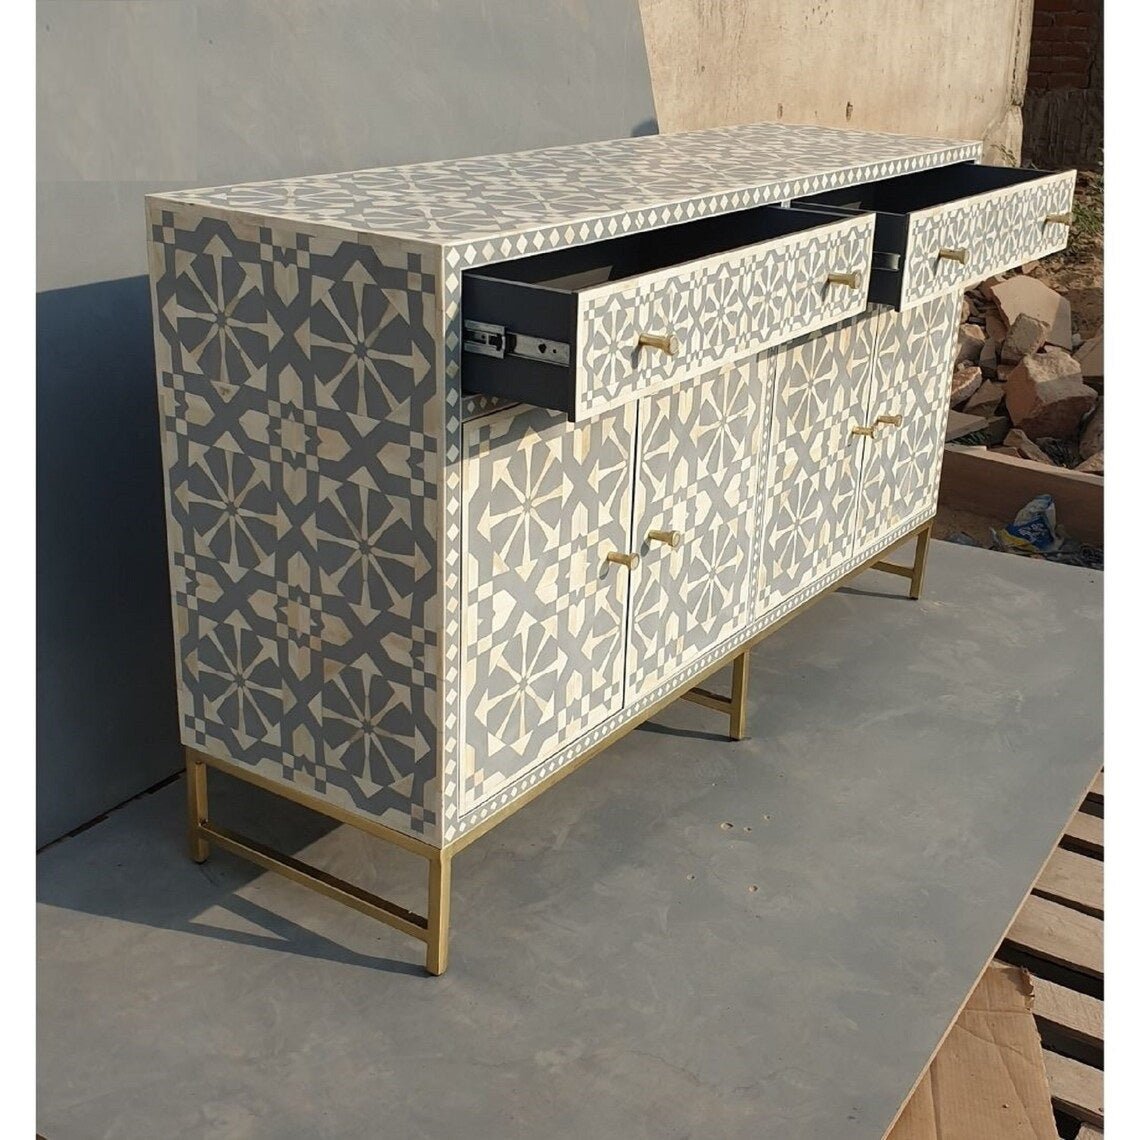 Handmade Bone Inlay Gray and White Color Sideboard | Handmade Bone Inlay Buffet Table Sideboard - Bone Inlay Furnitures